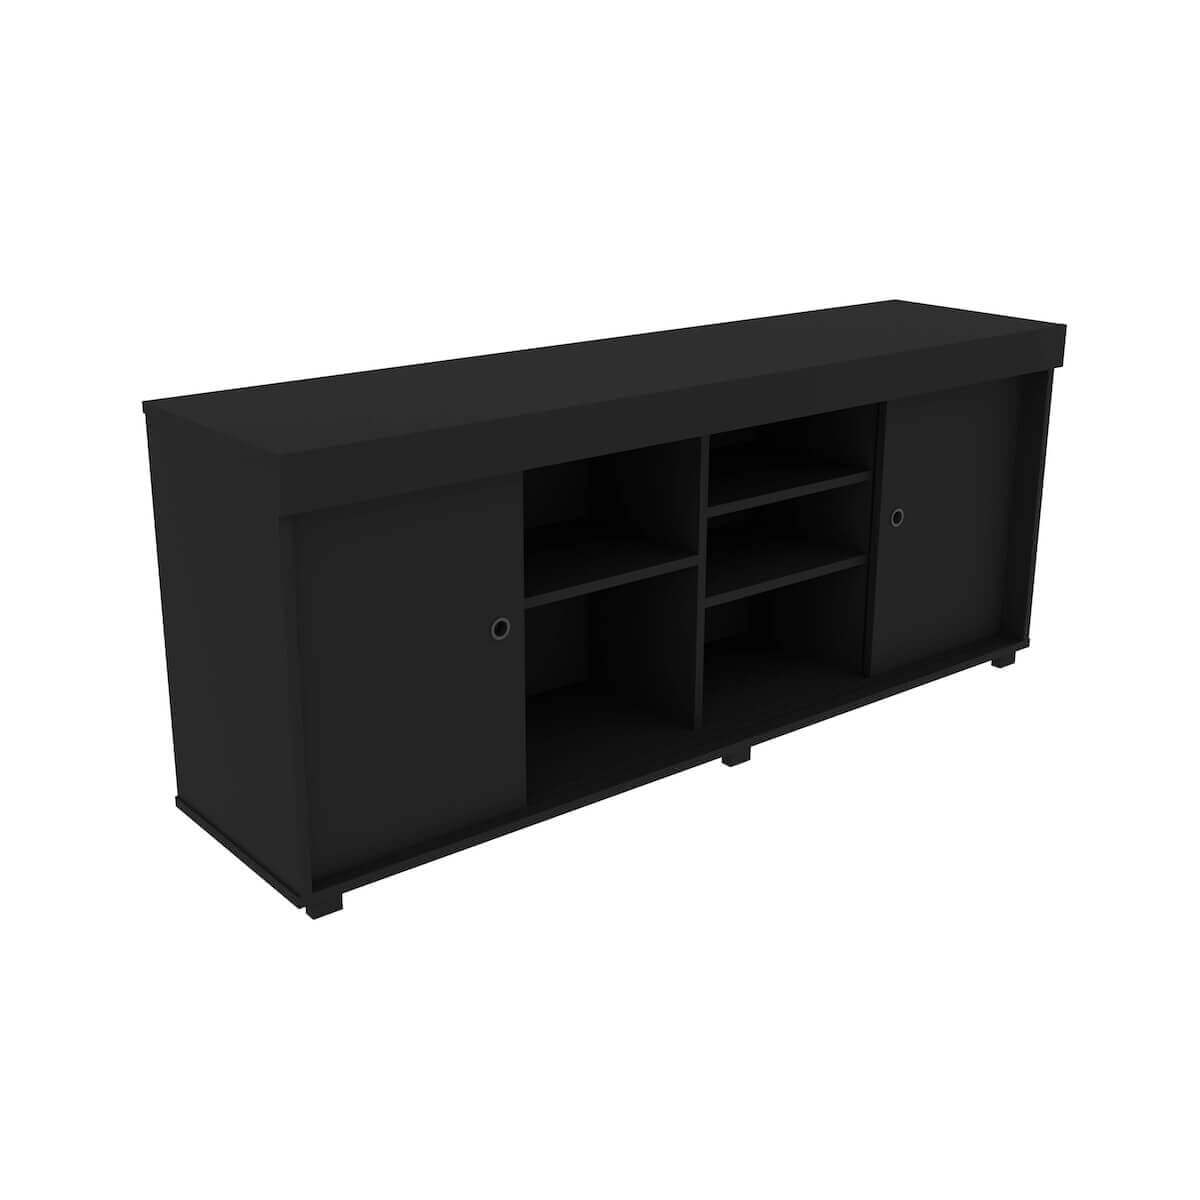 Techni Mobili Black TV Stand with Storage for TVs Up to 60" Side RTA-9500TV-BK #color_black